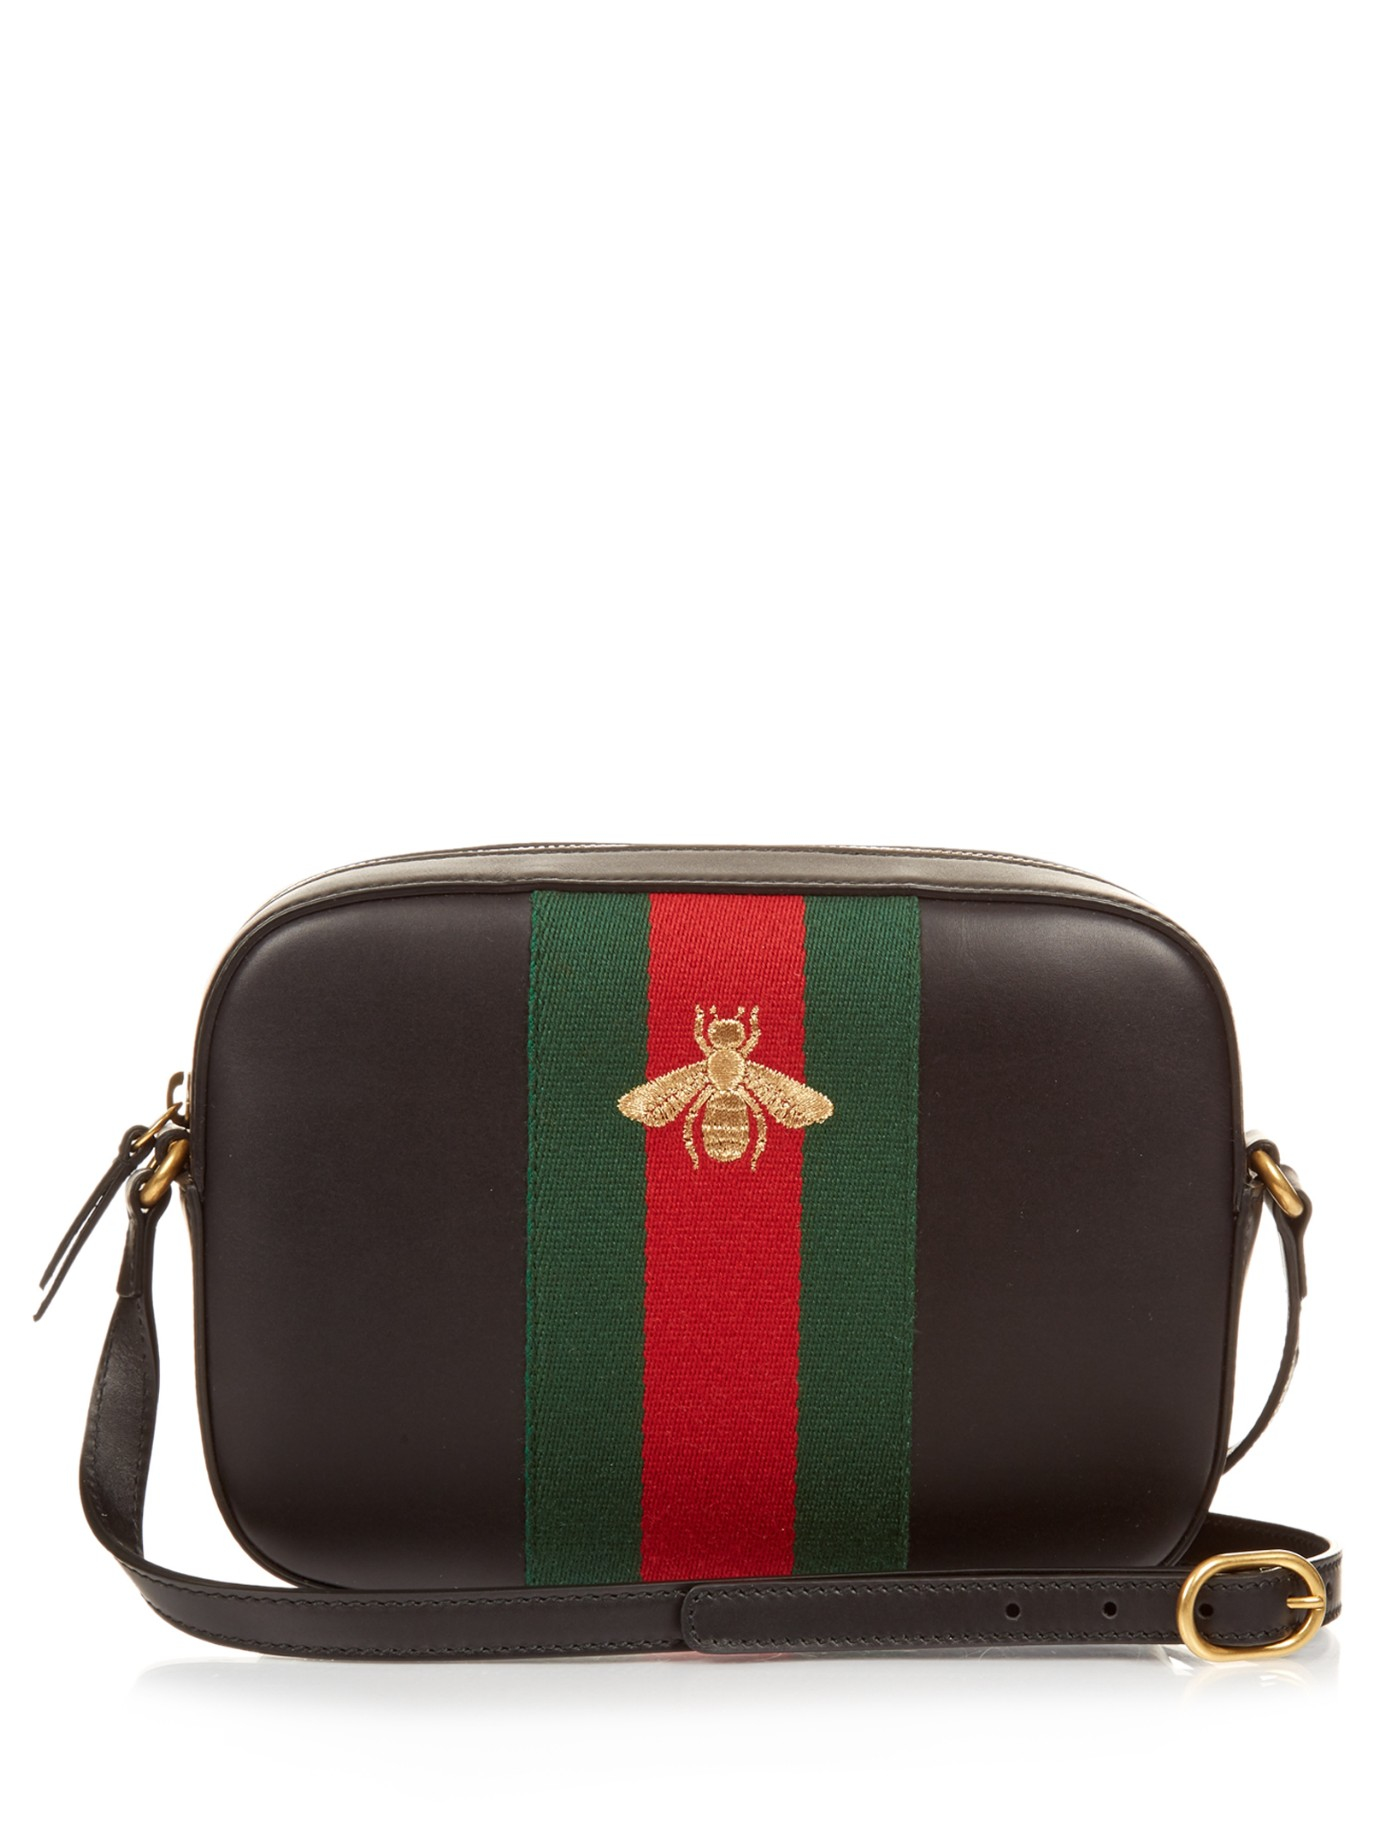 Gucci Line Bee-Embroidered Leather Cross-Body Bag in Blue - Lyst